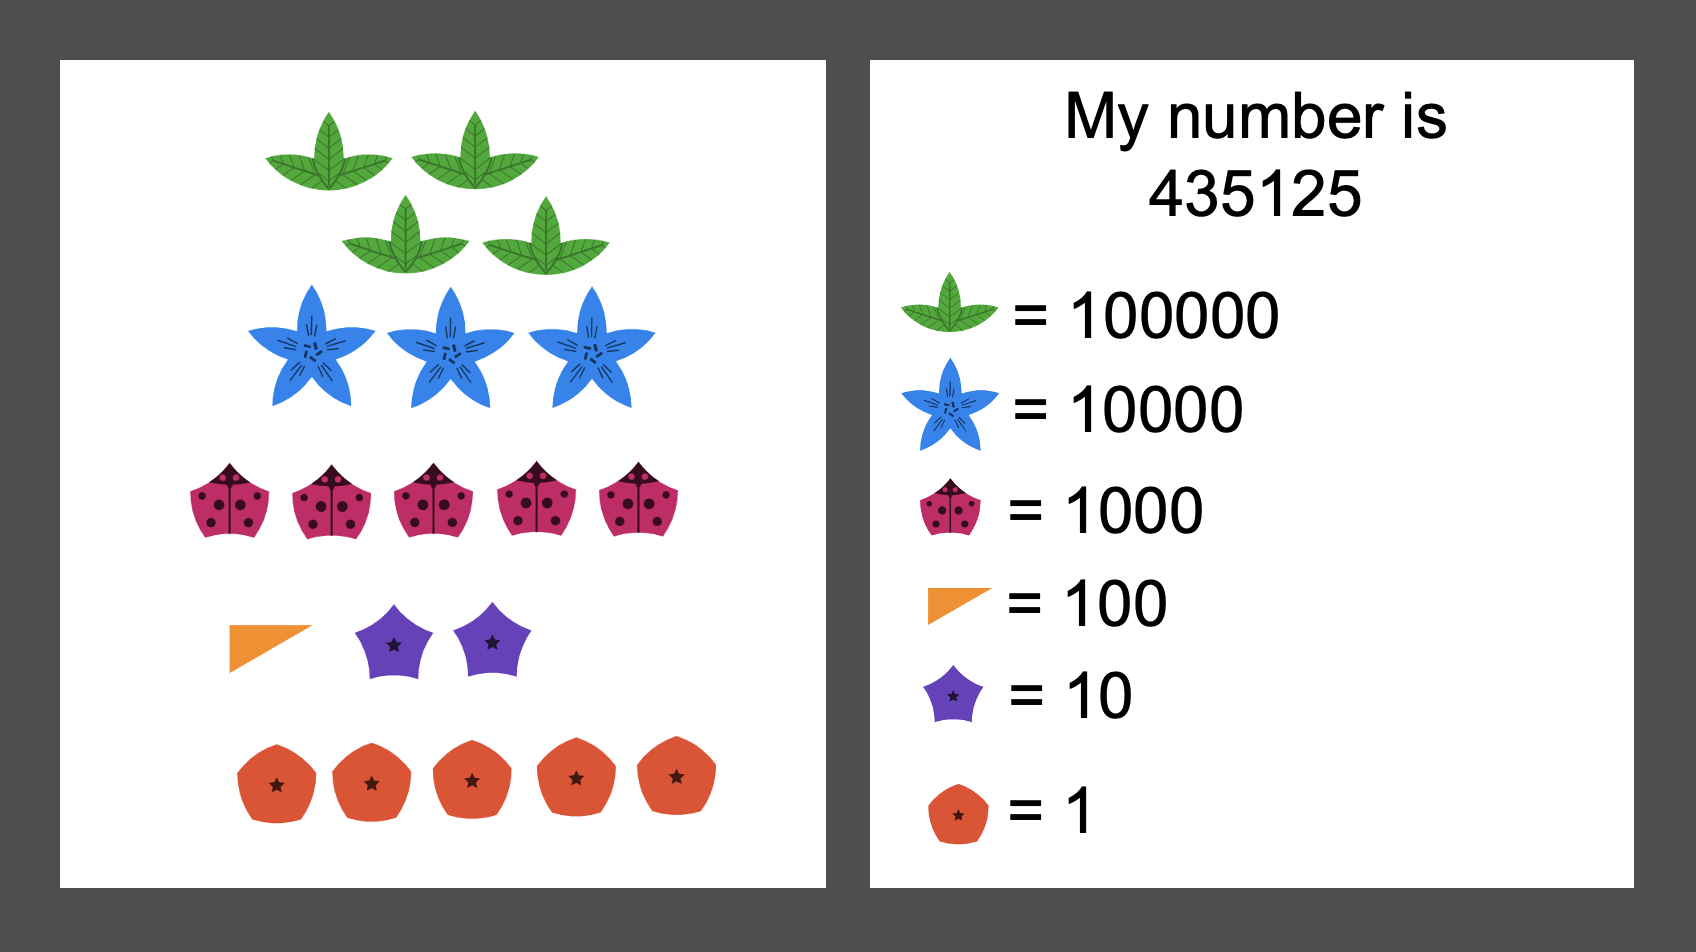 This image shows a large number represented using symbols and a legend